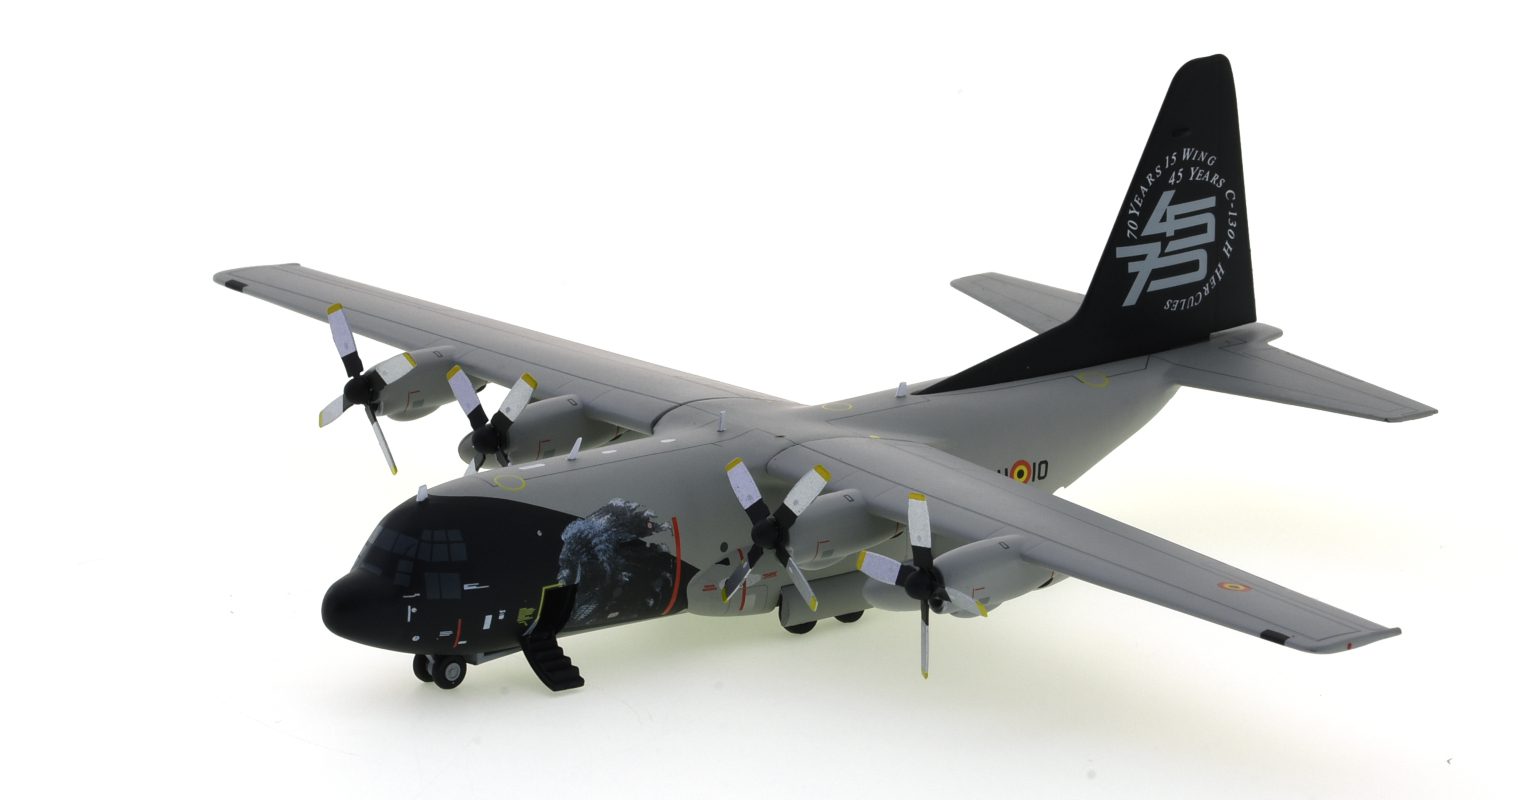 Front port side view of Herpa HE559843 - 1/200 scale diecast model Lockheed C-130H Hercules, in commemorative scheme for the 70th anniversary of the 15th Air Transport Wing, Belgian air Component and 45 years of the C-130 Hercules in Belgian service.